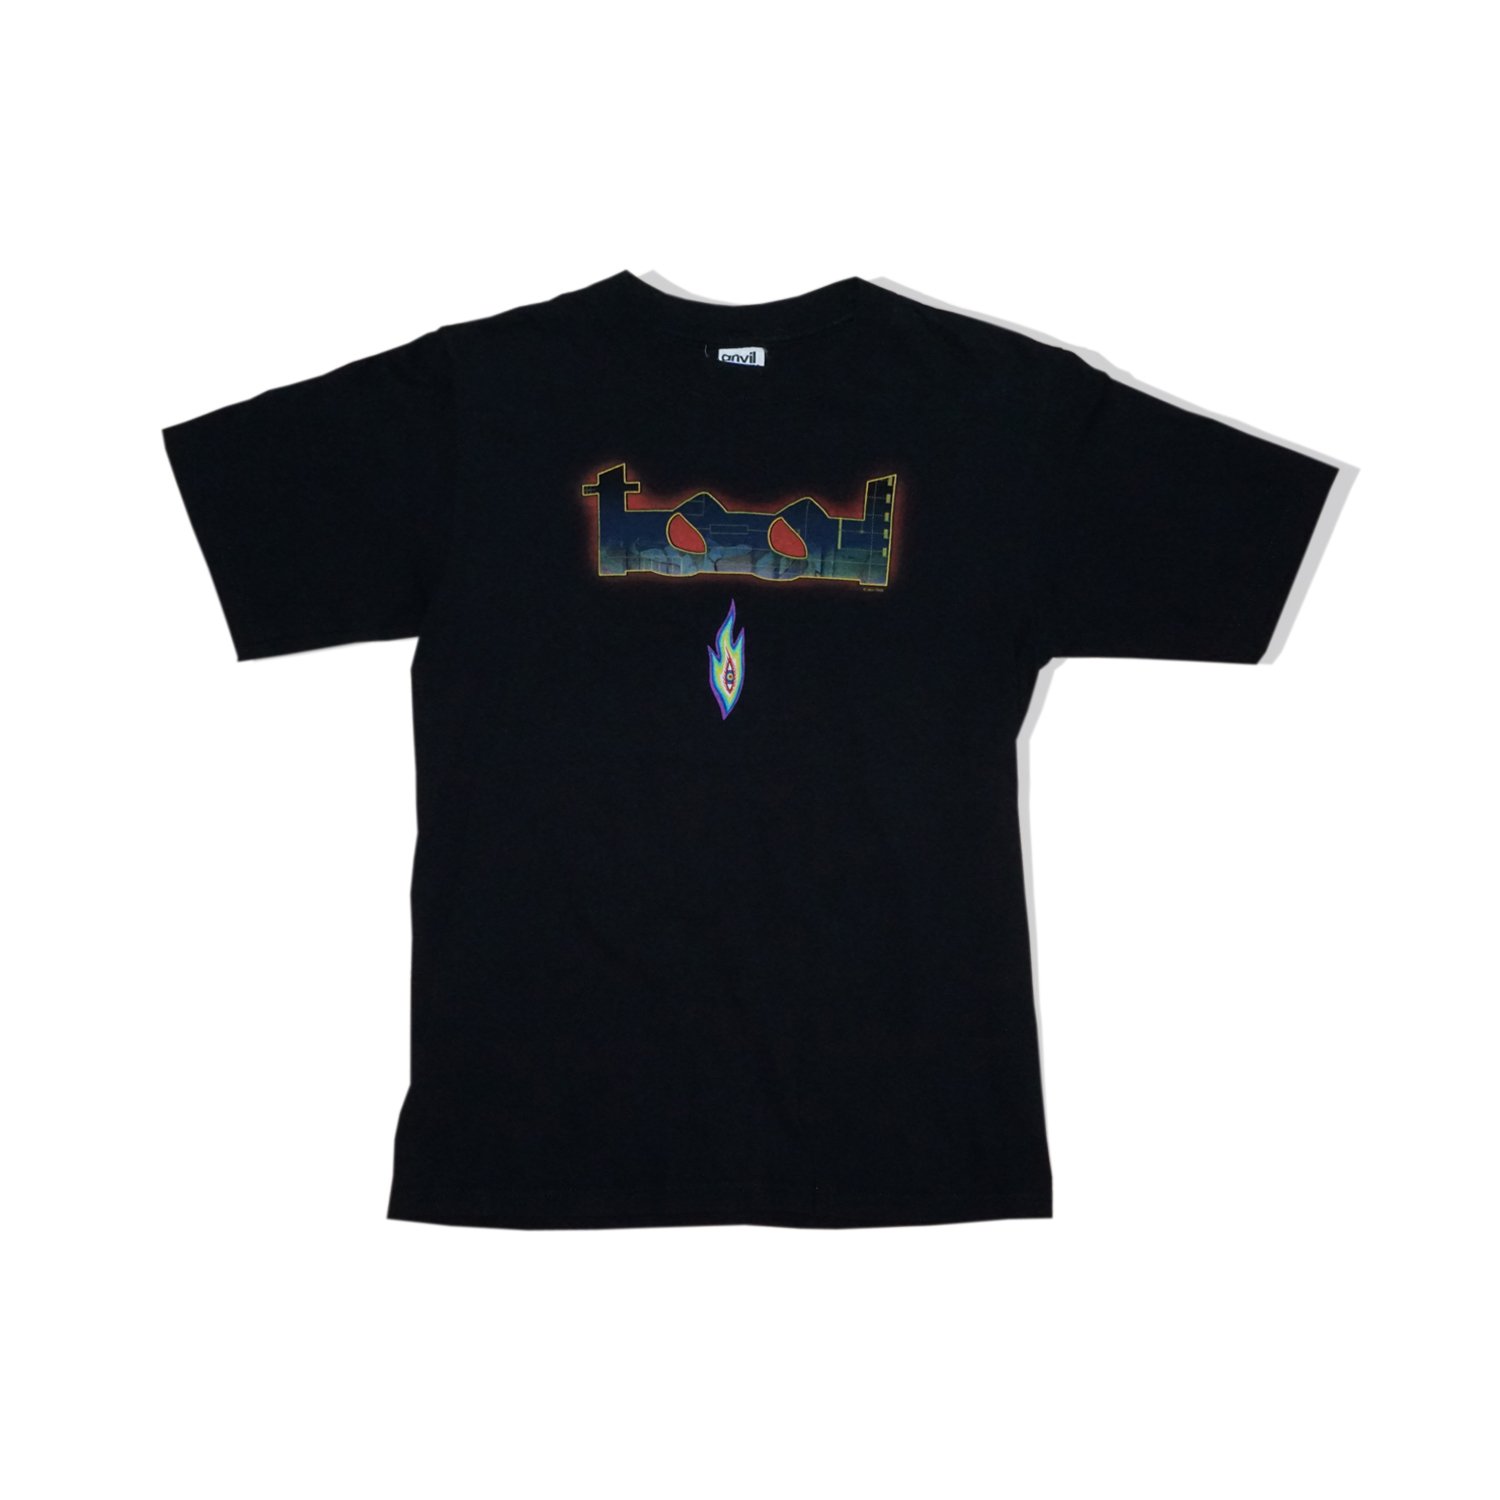 Vintage TOOL Band T-Shirt (Sam Russo Collection)